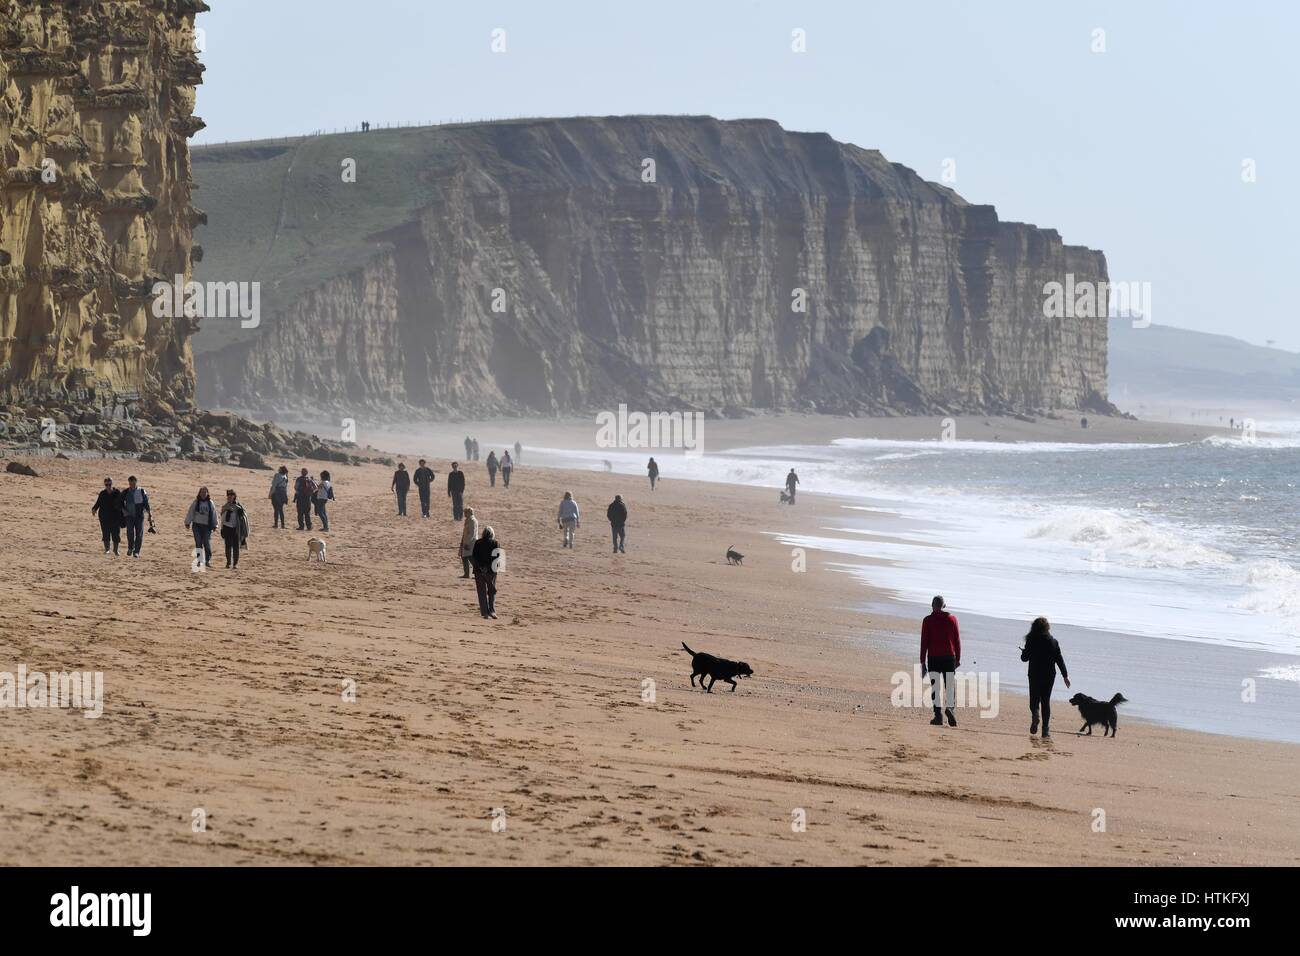 West Bay beach, Dorset, UK. 13th March 2017.UK Weather: Sunny and warm at West Bay, Dorset. Credit: Dorset Media Service/Alamy Live News Stock Photo